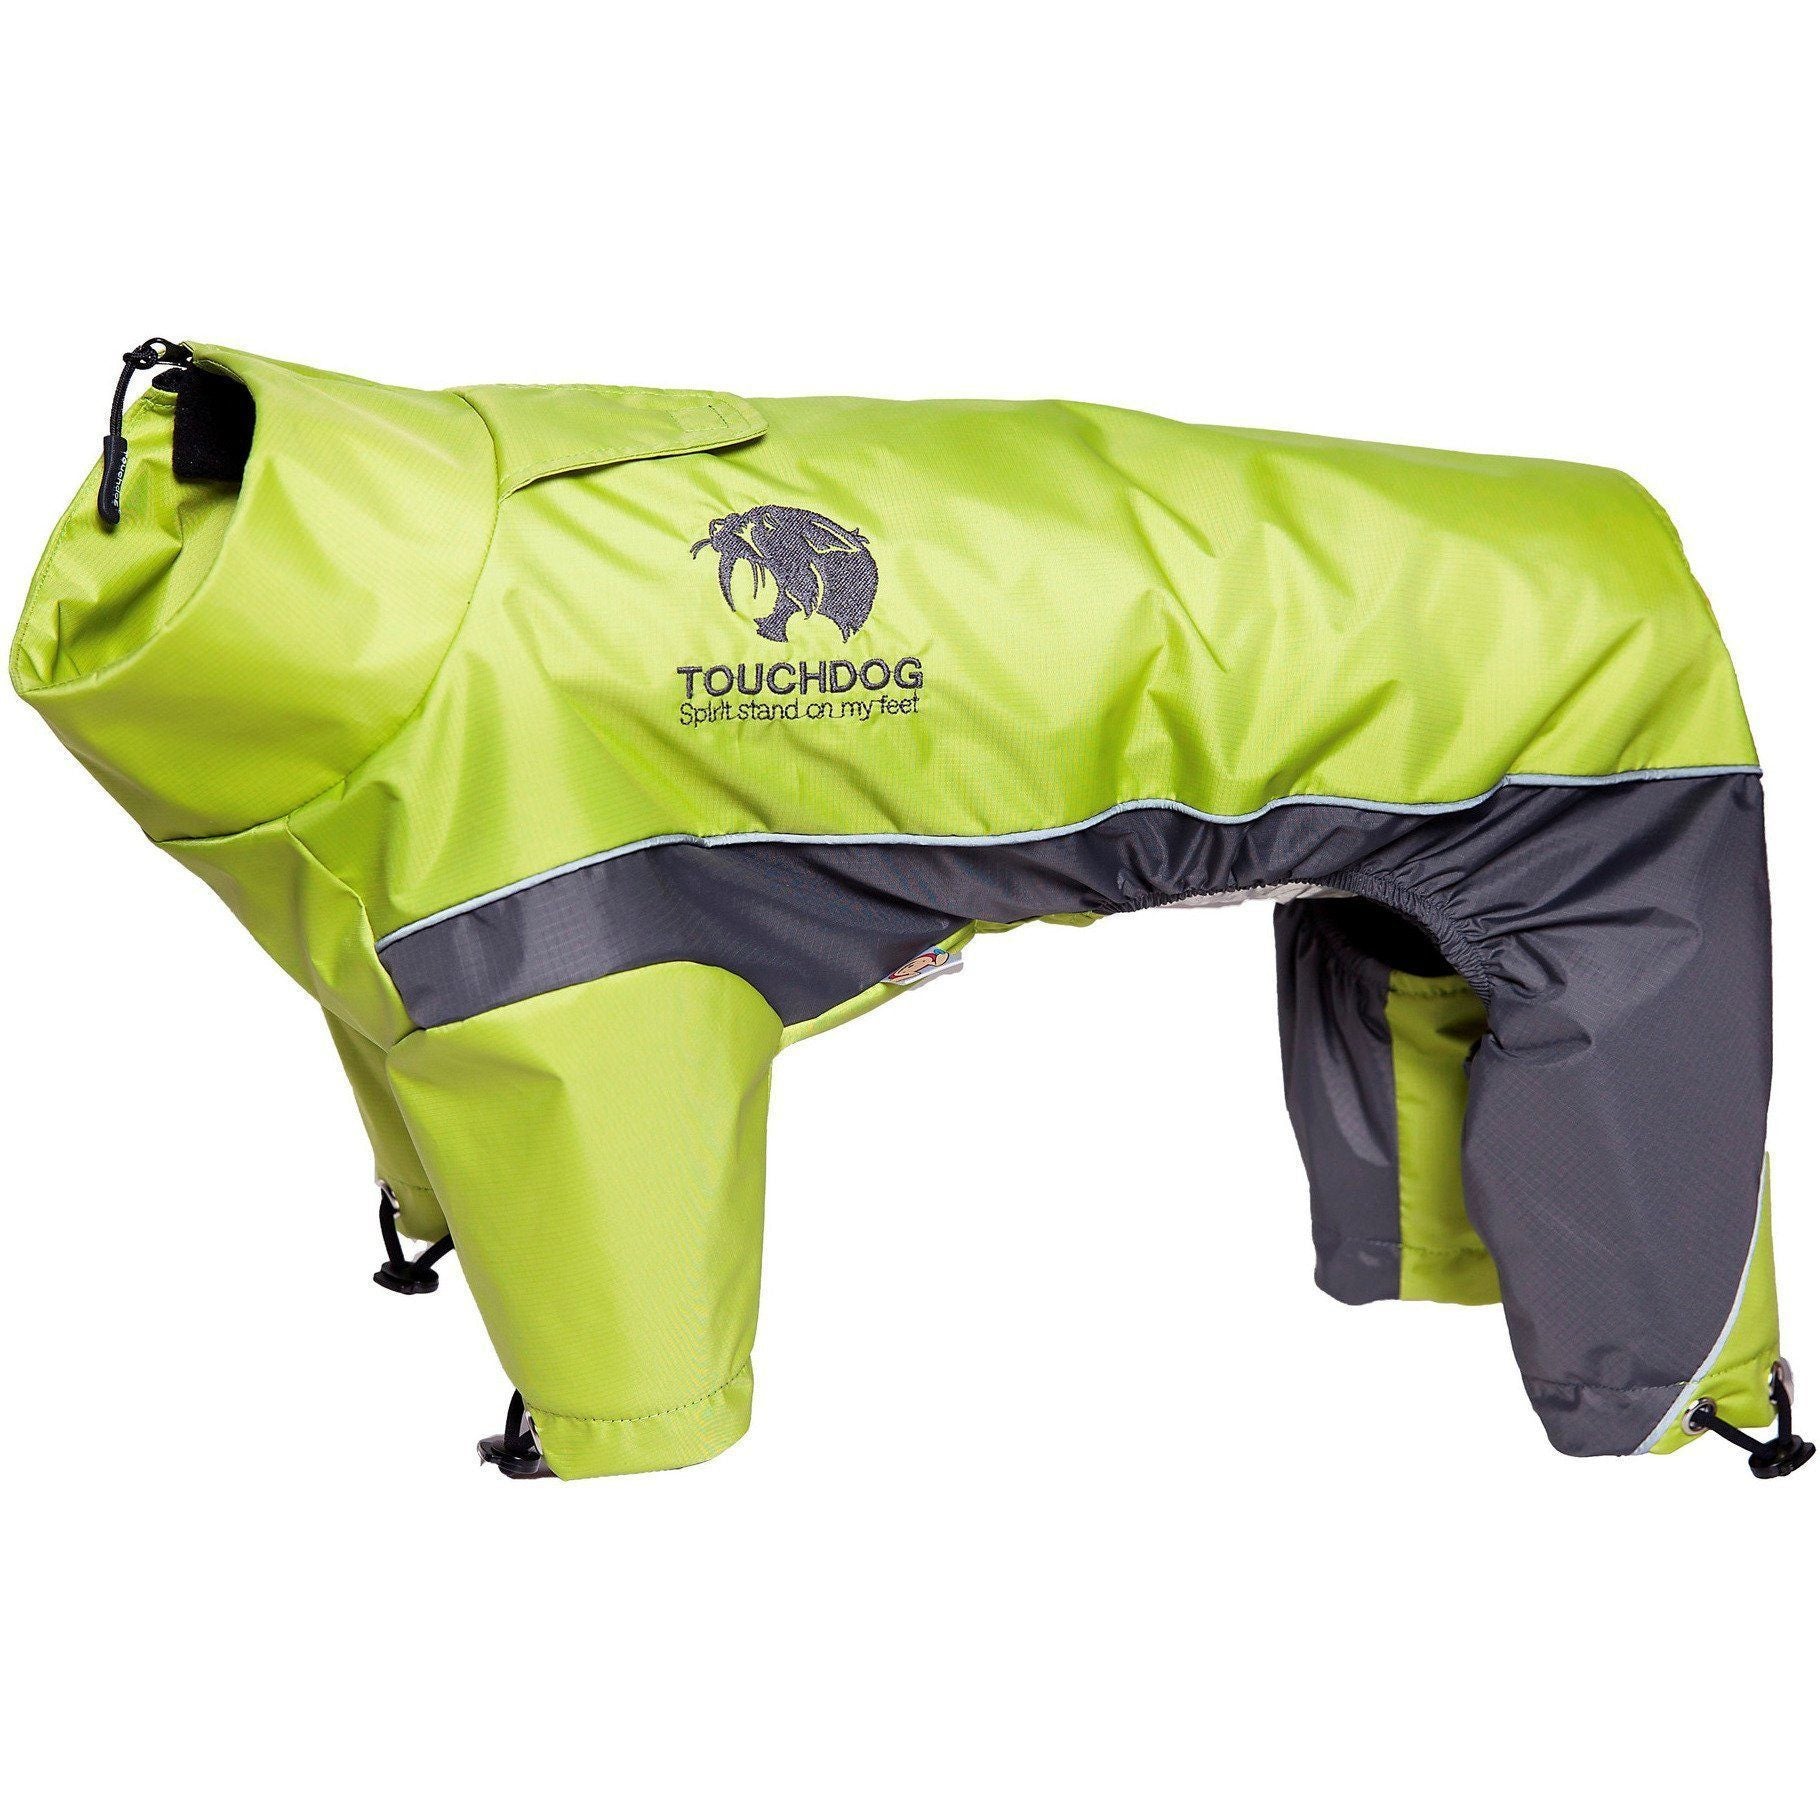 Touchdog ® Quantum-Ice Adjustable and Reflective Full-Body Winter Dog Jacket X-Small Light Yellow, Grey